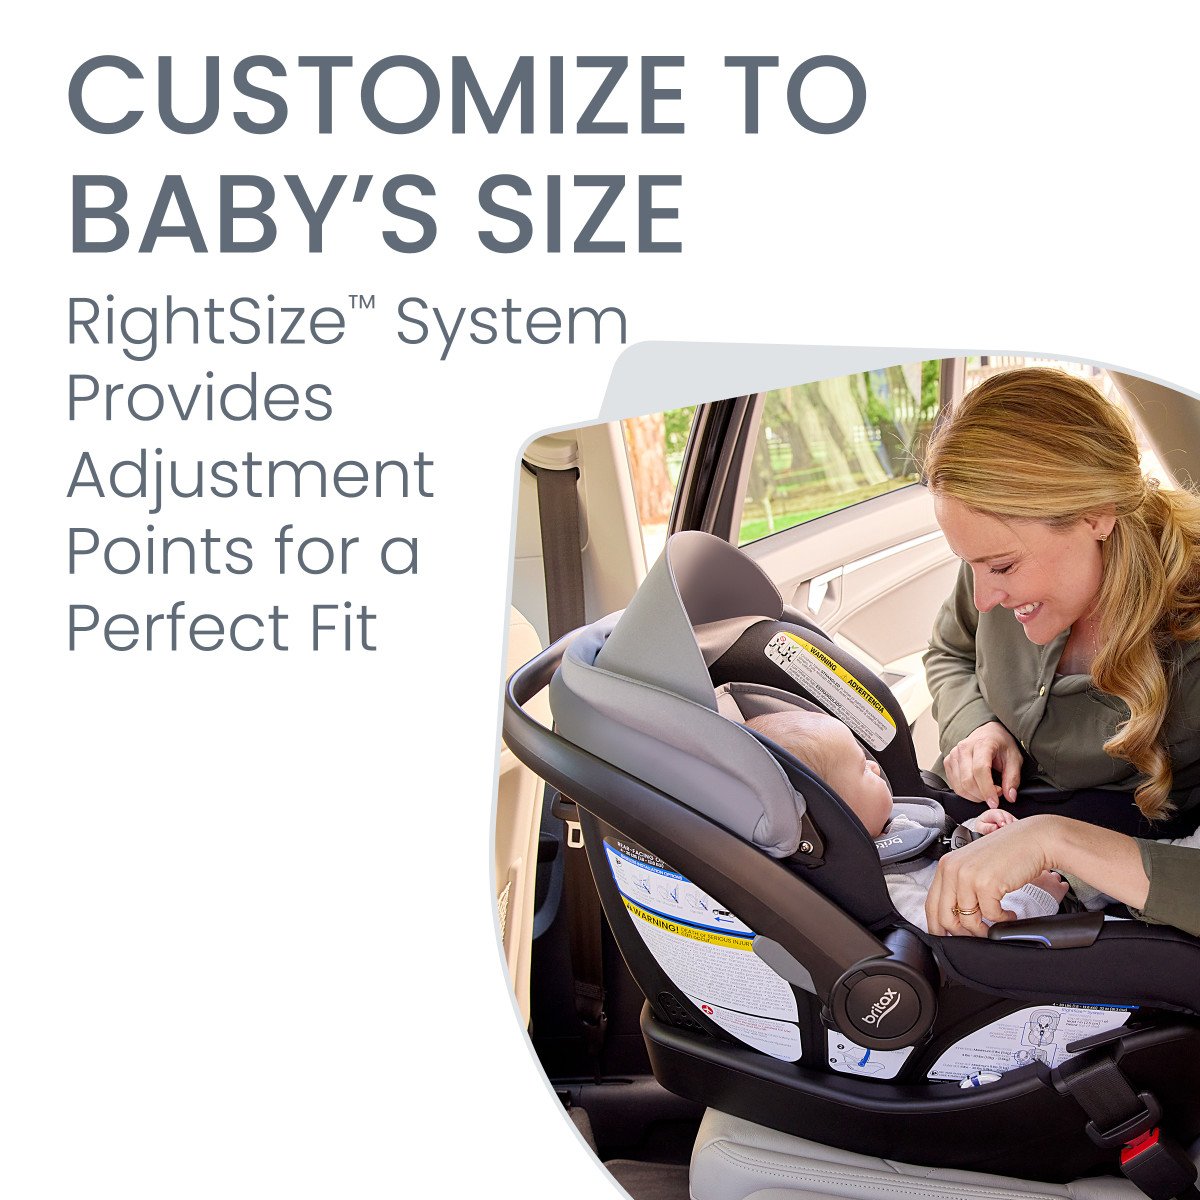 Customize to Baby's size with RightSize System